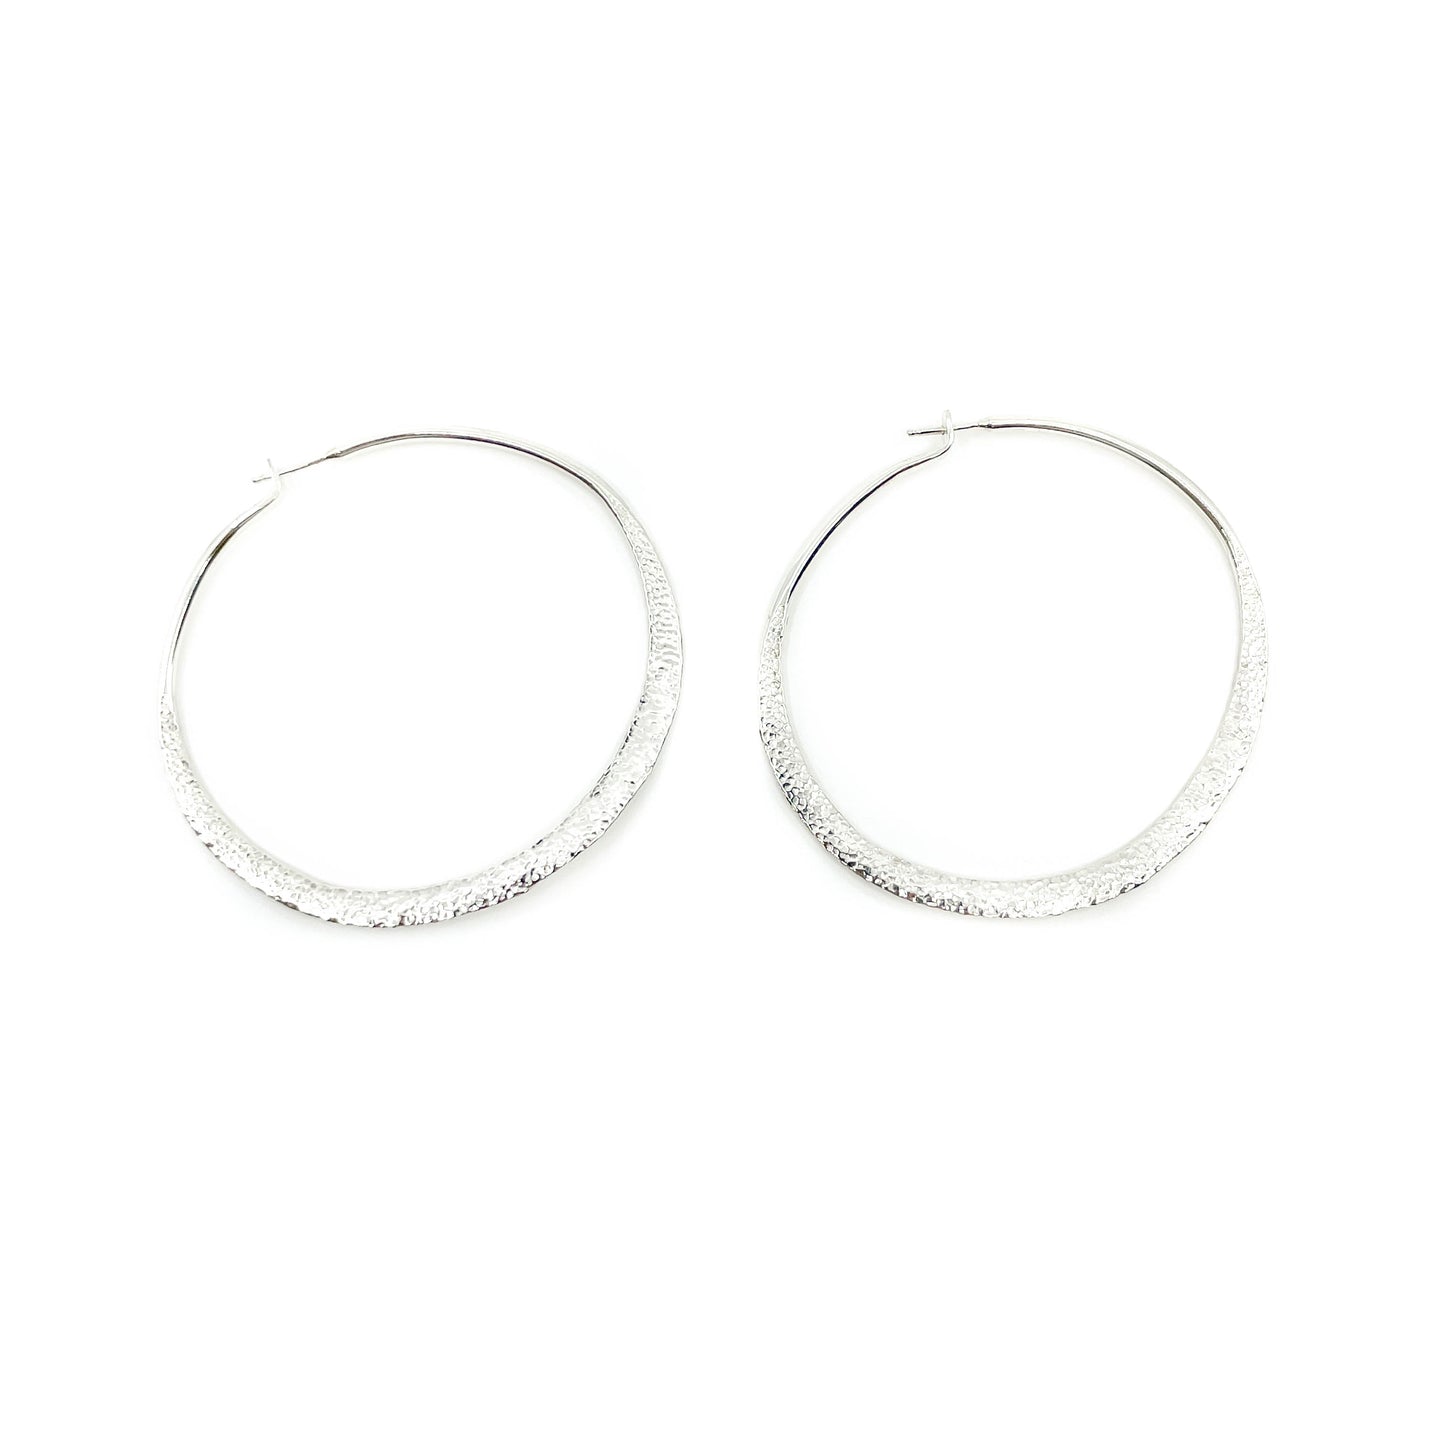 Sterling silver hand hammered and textured, wavy hoop earrings by Elgin Tom Sterling silver posts  Approximate dimensions: Hoops are 2.25 inches in diameter and just shy of 1/4 of an inch wide at widest flat area on bottom of hoop